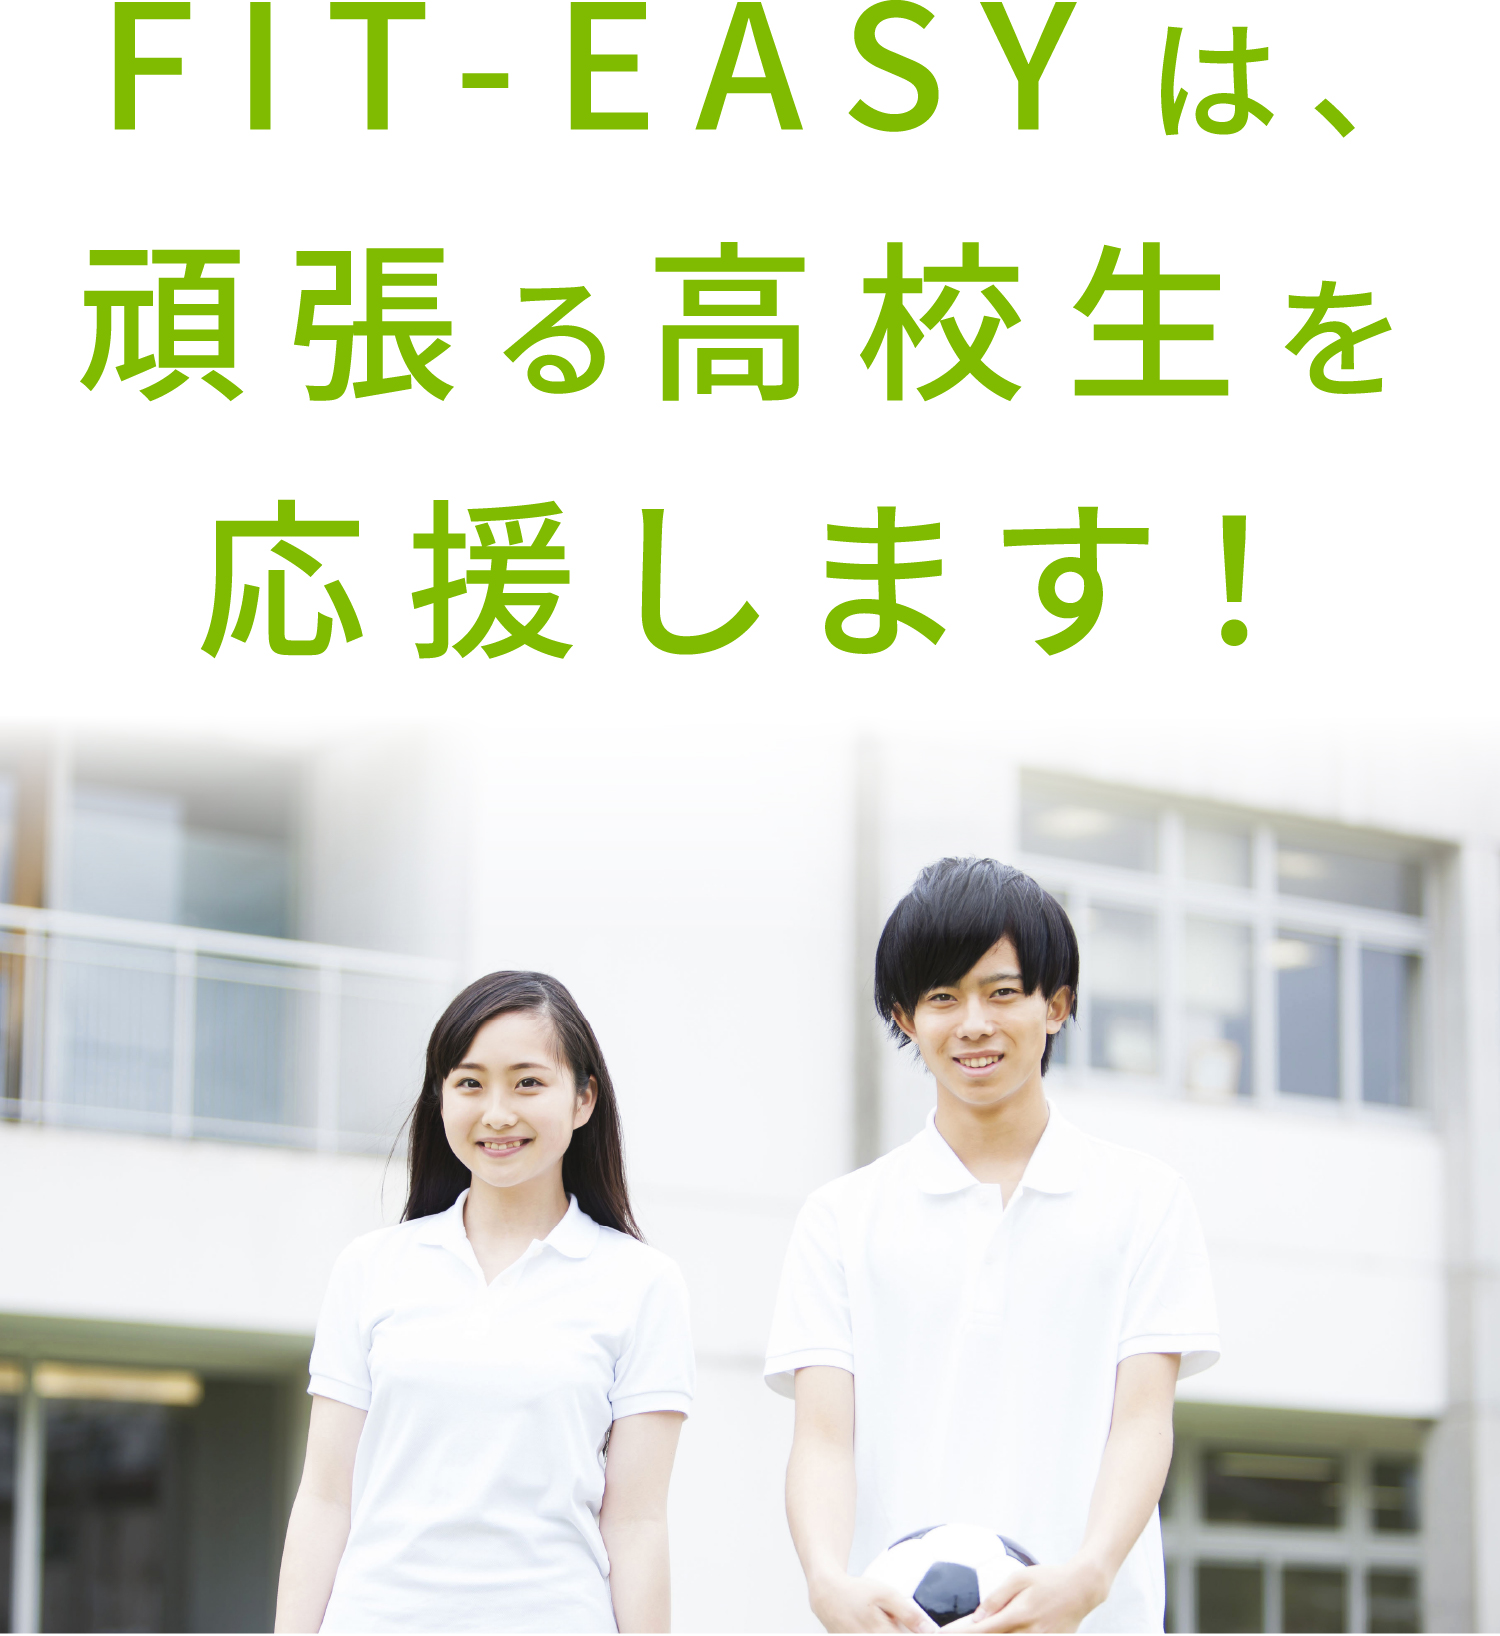 FIT-EASYは、頑張る高校生を応援します！